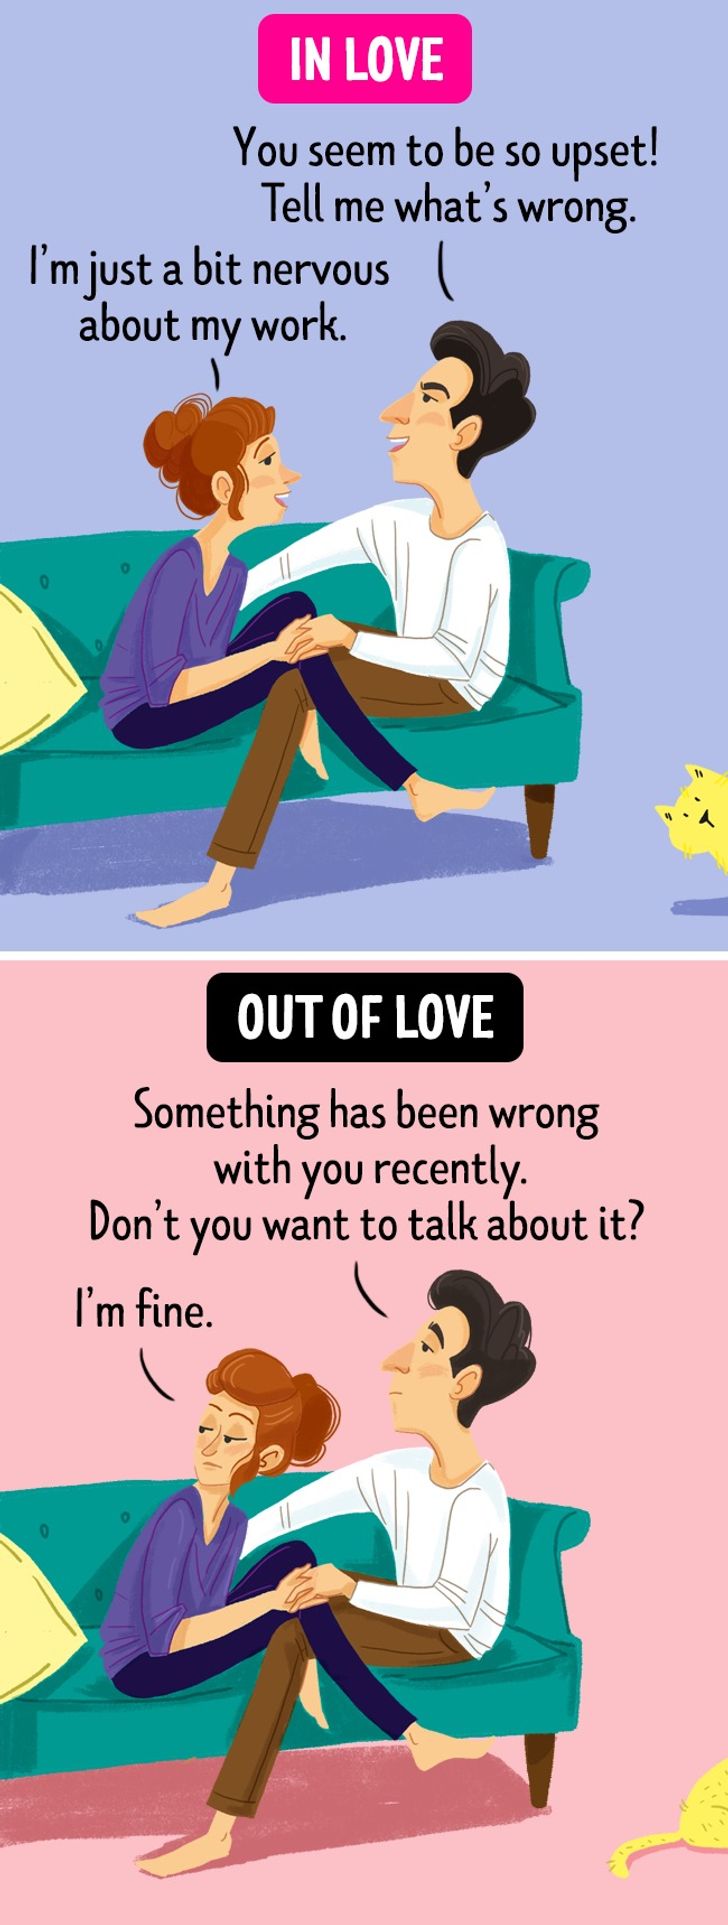 8 Things Women Do When Out of Love